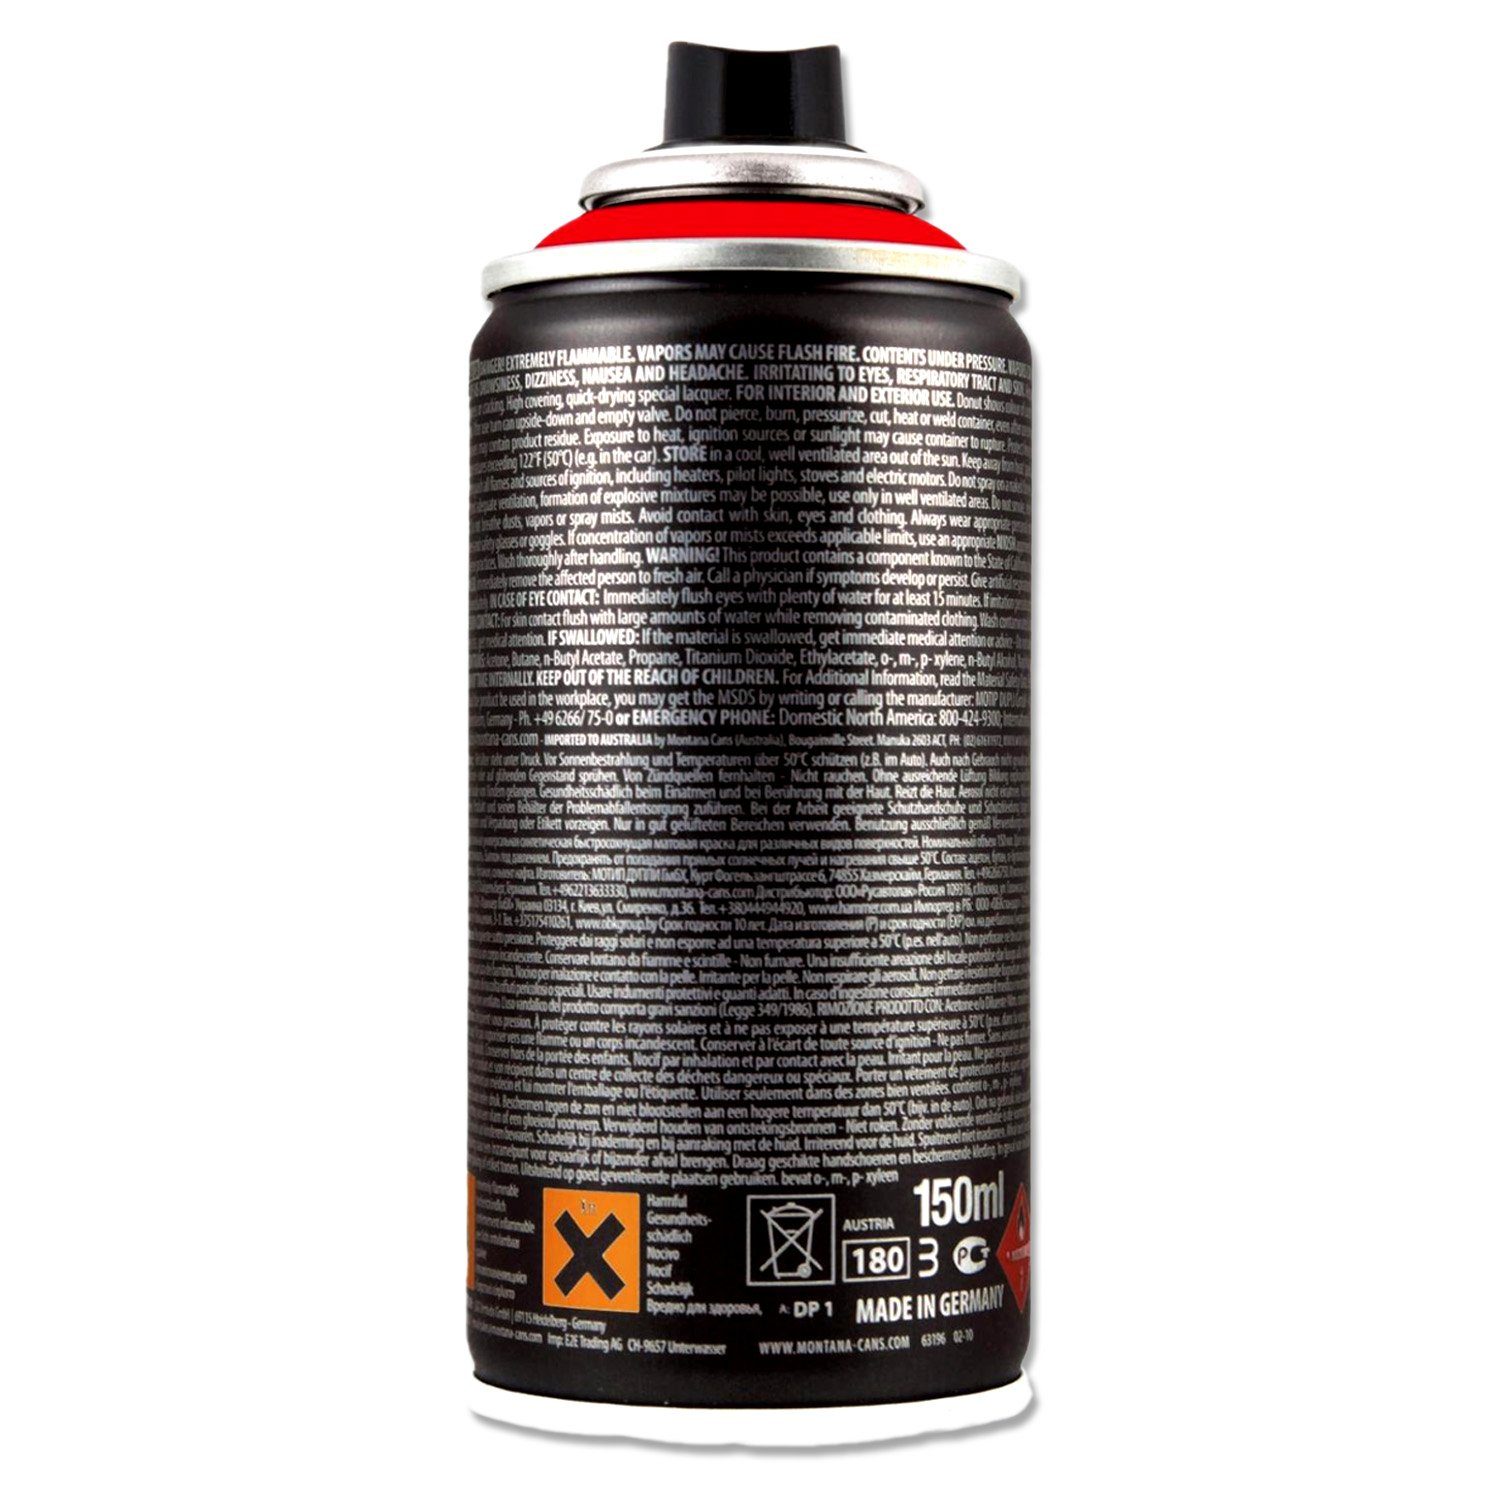 Cans Montana Sprühfarbe Red (Farbauswahl) Cans BLACK Montana Code Mini 150ml